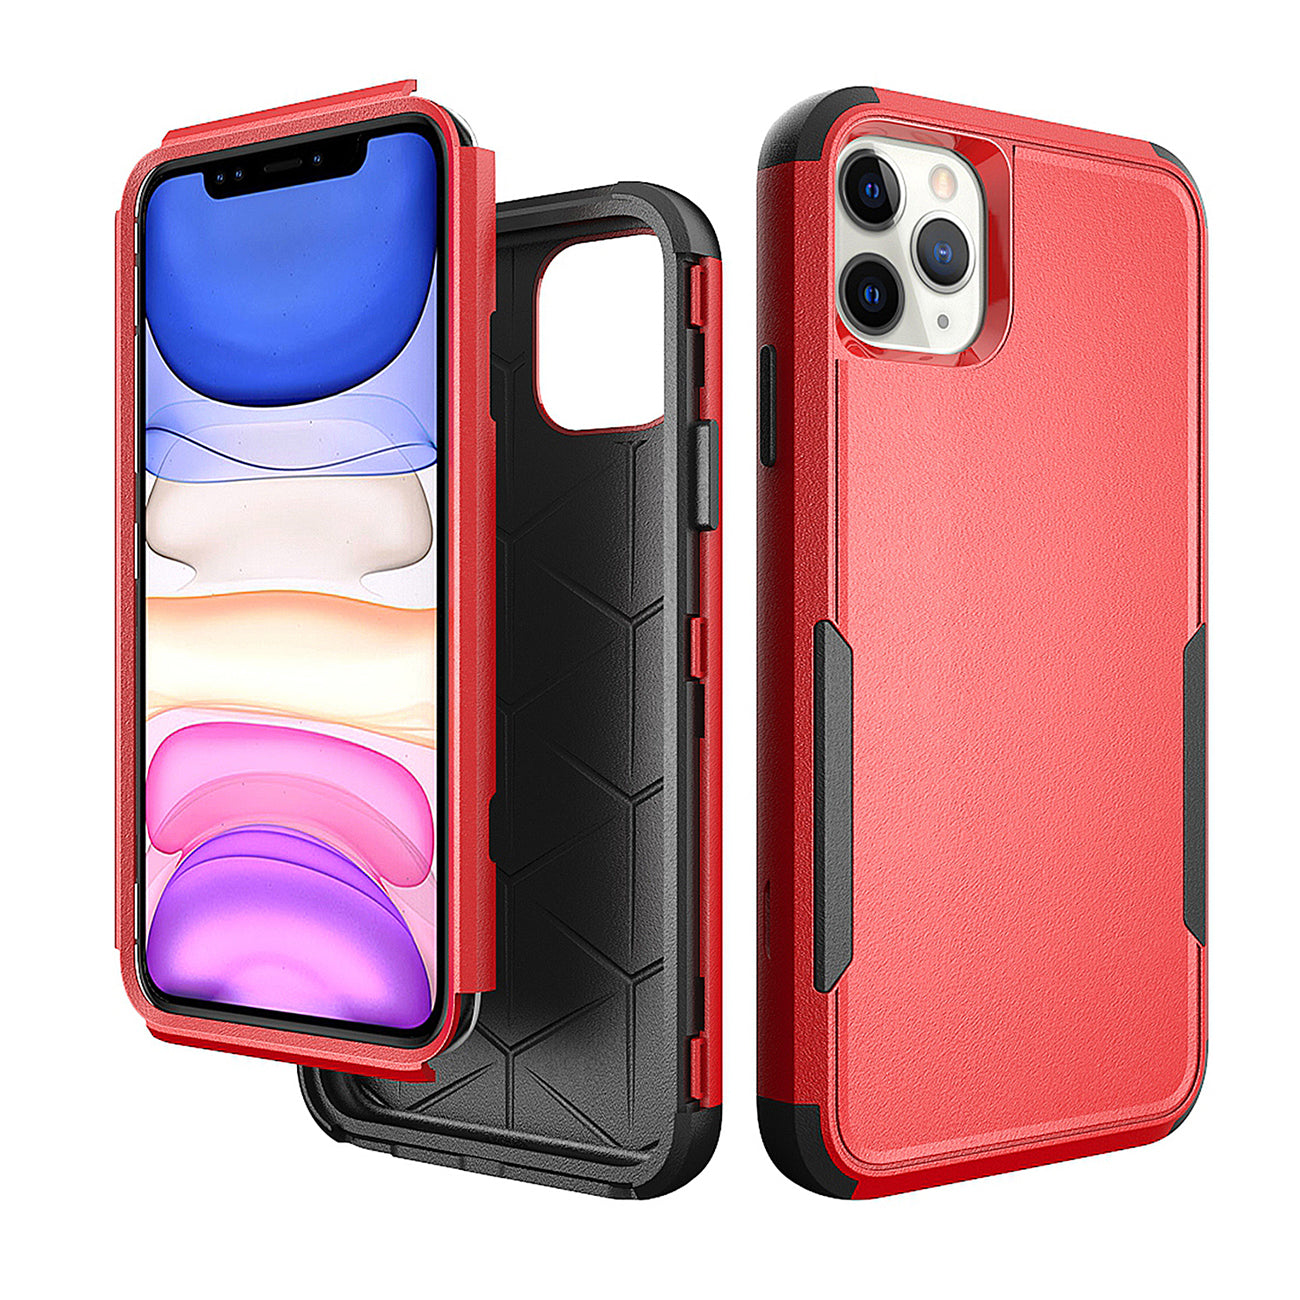 3in1 Hybrid Heavy Duty Defender Rugged Armor Case For APPLE IPHONE 11 PRO In Red